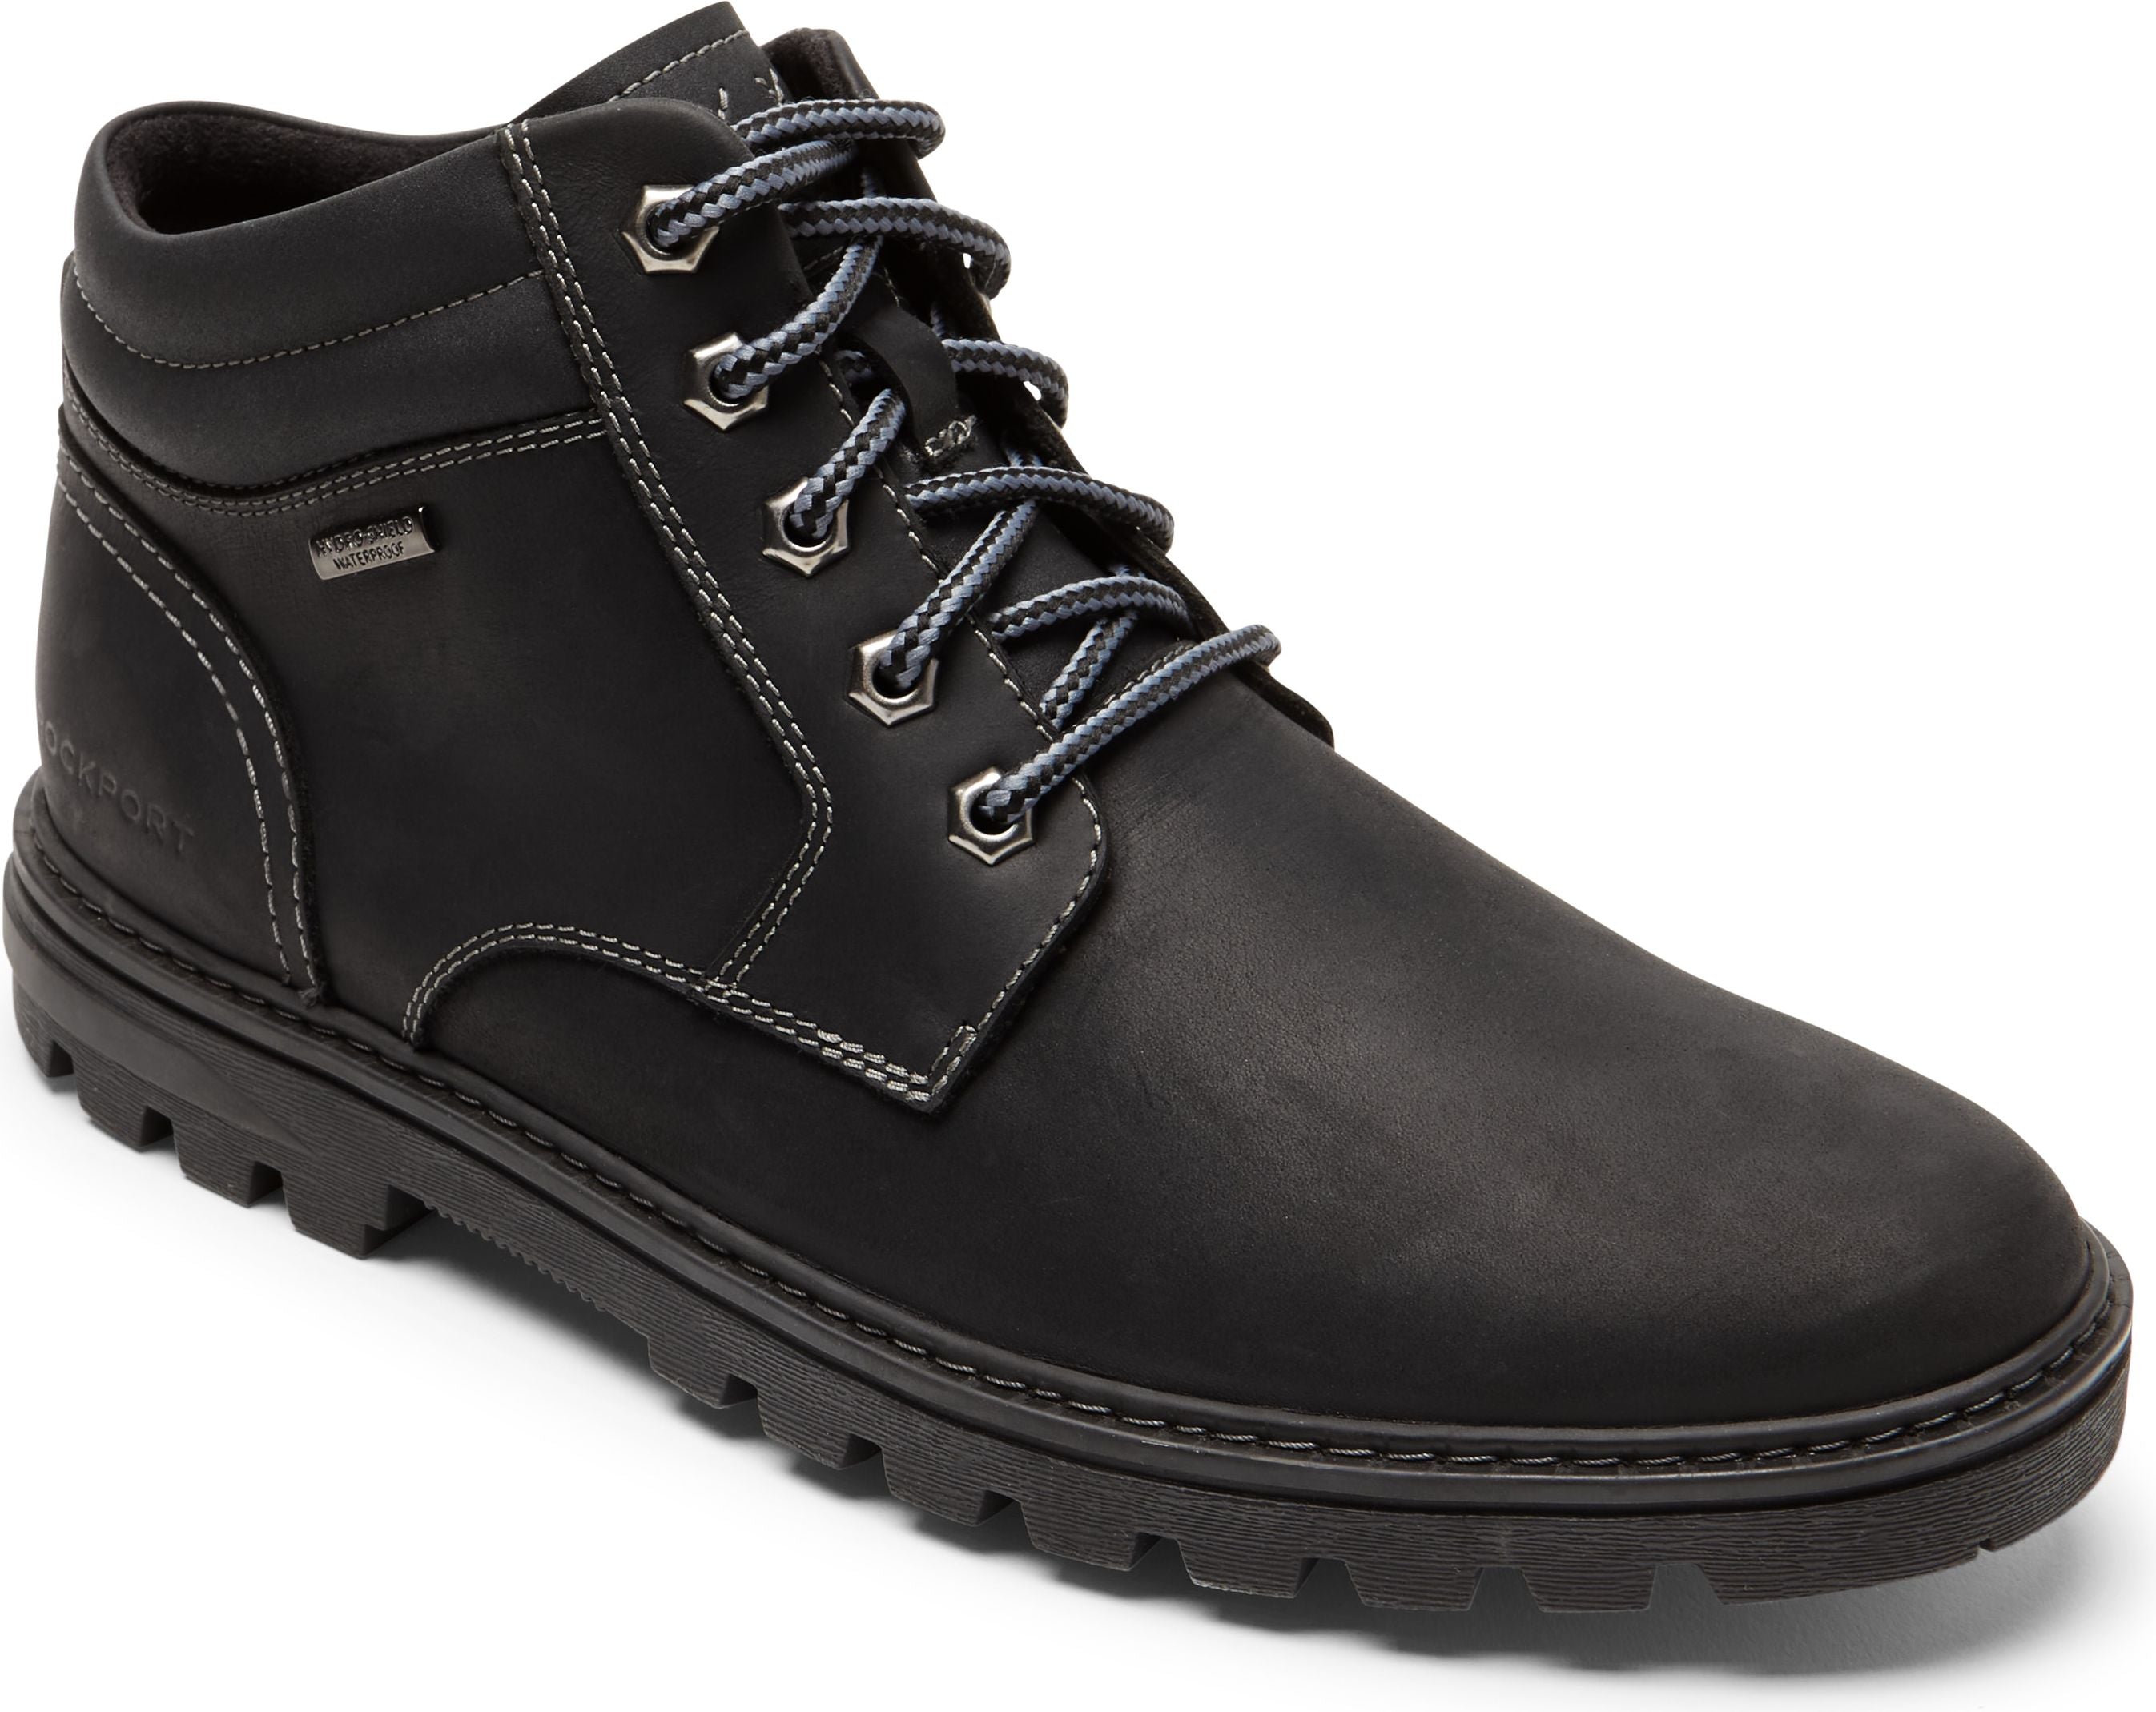 Weather Or Not Pt Boot Black - Wide